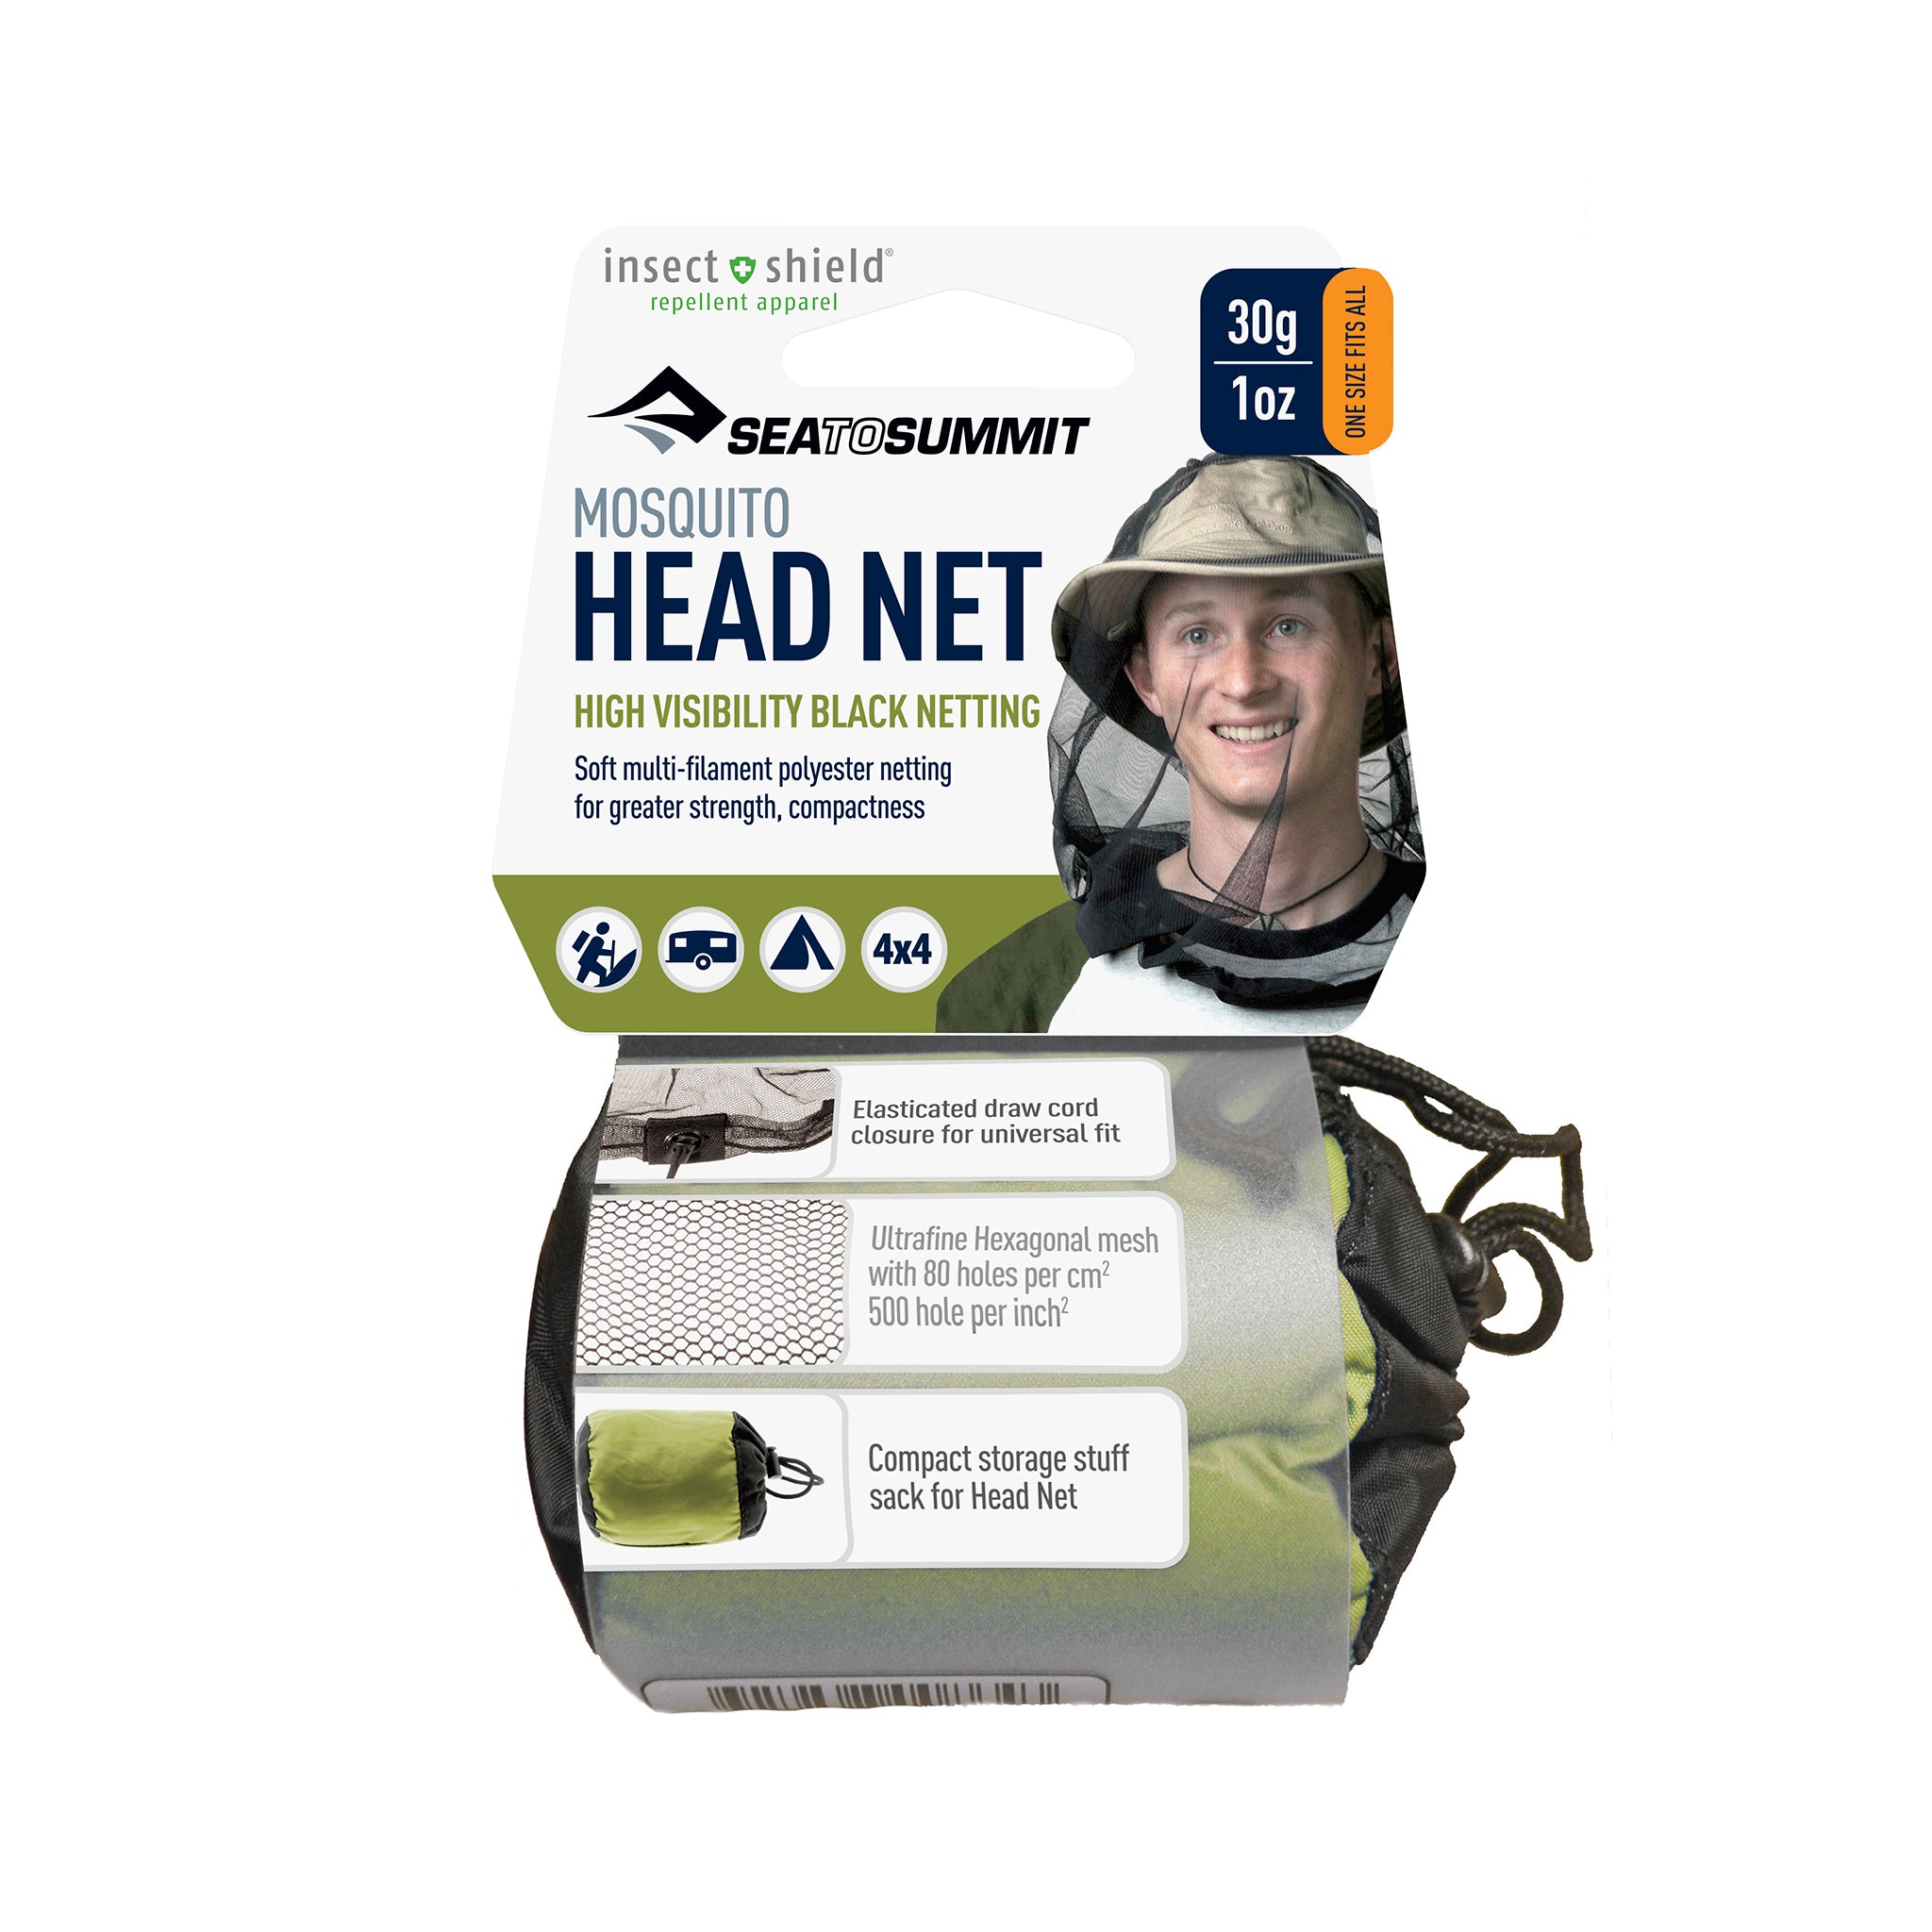 Mosquito Bug Head Net with Insect Shield